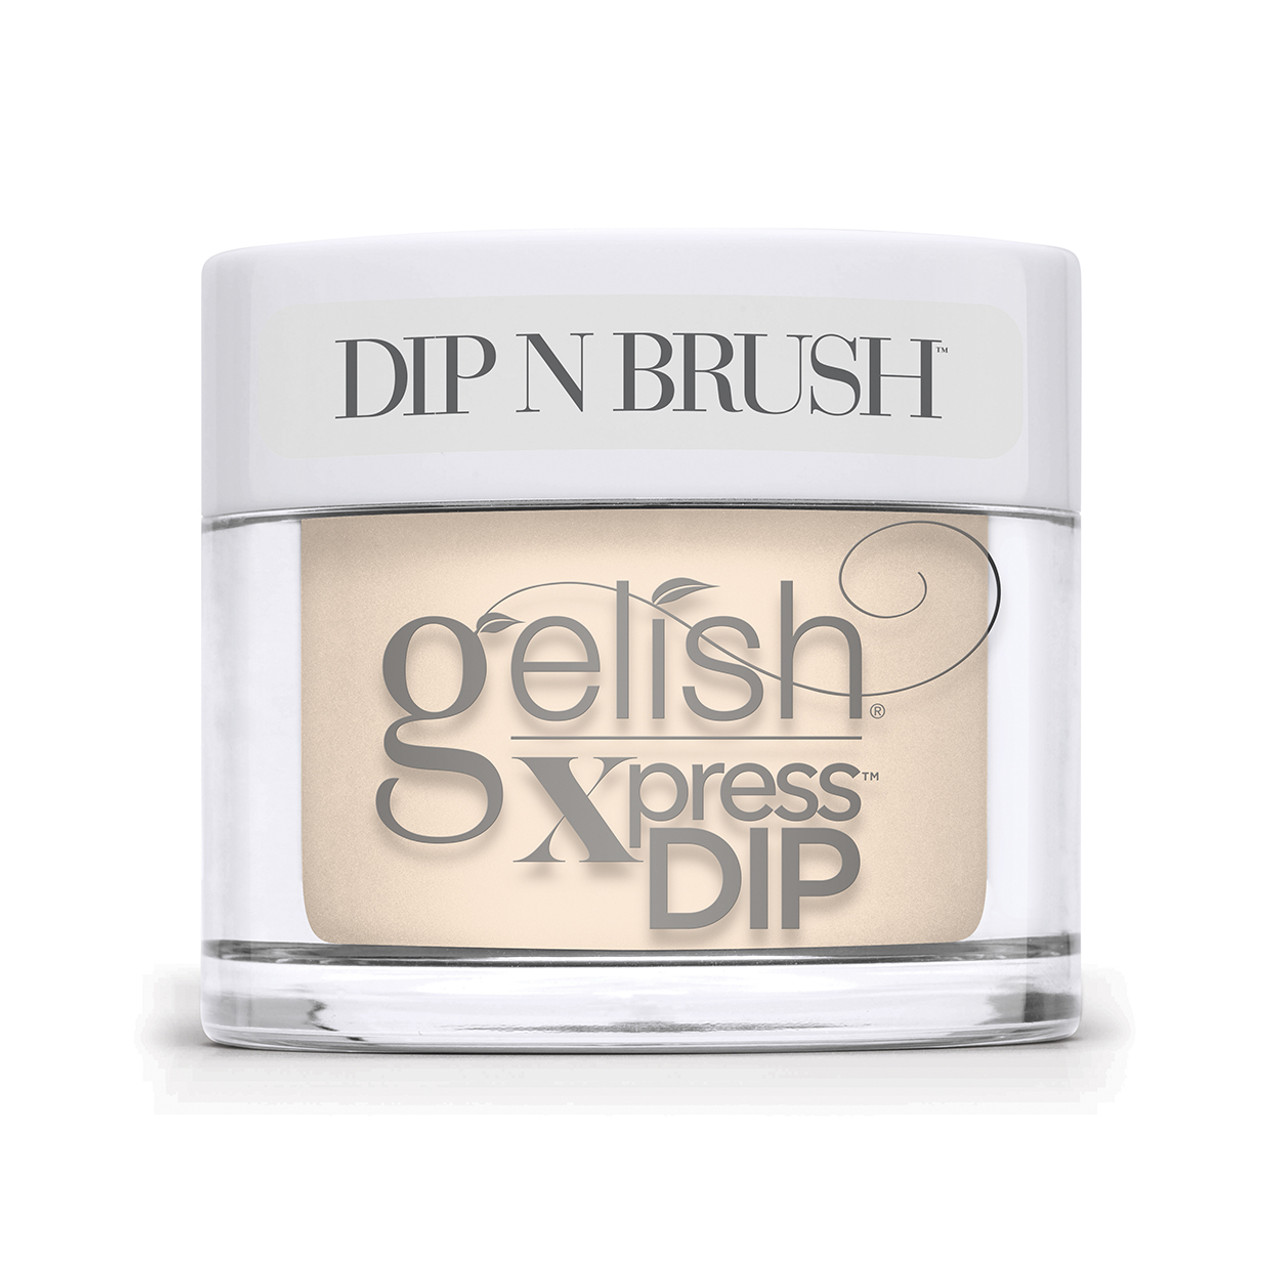 Gelish Xpress Dip Wrapped Around Your Finger - 1.5 oz / 43 g